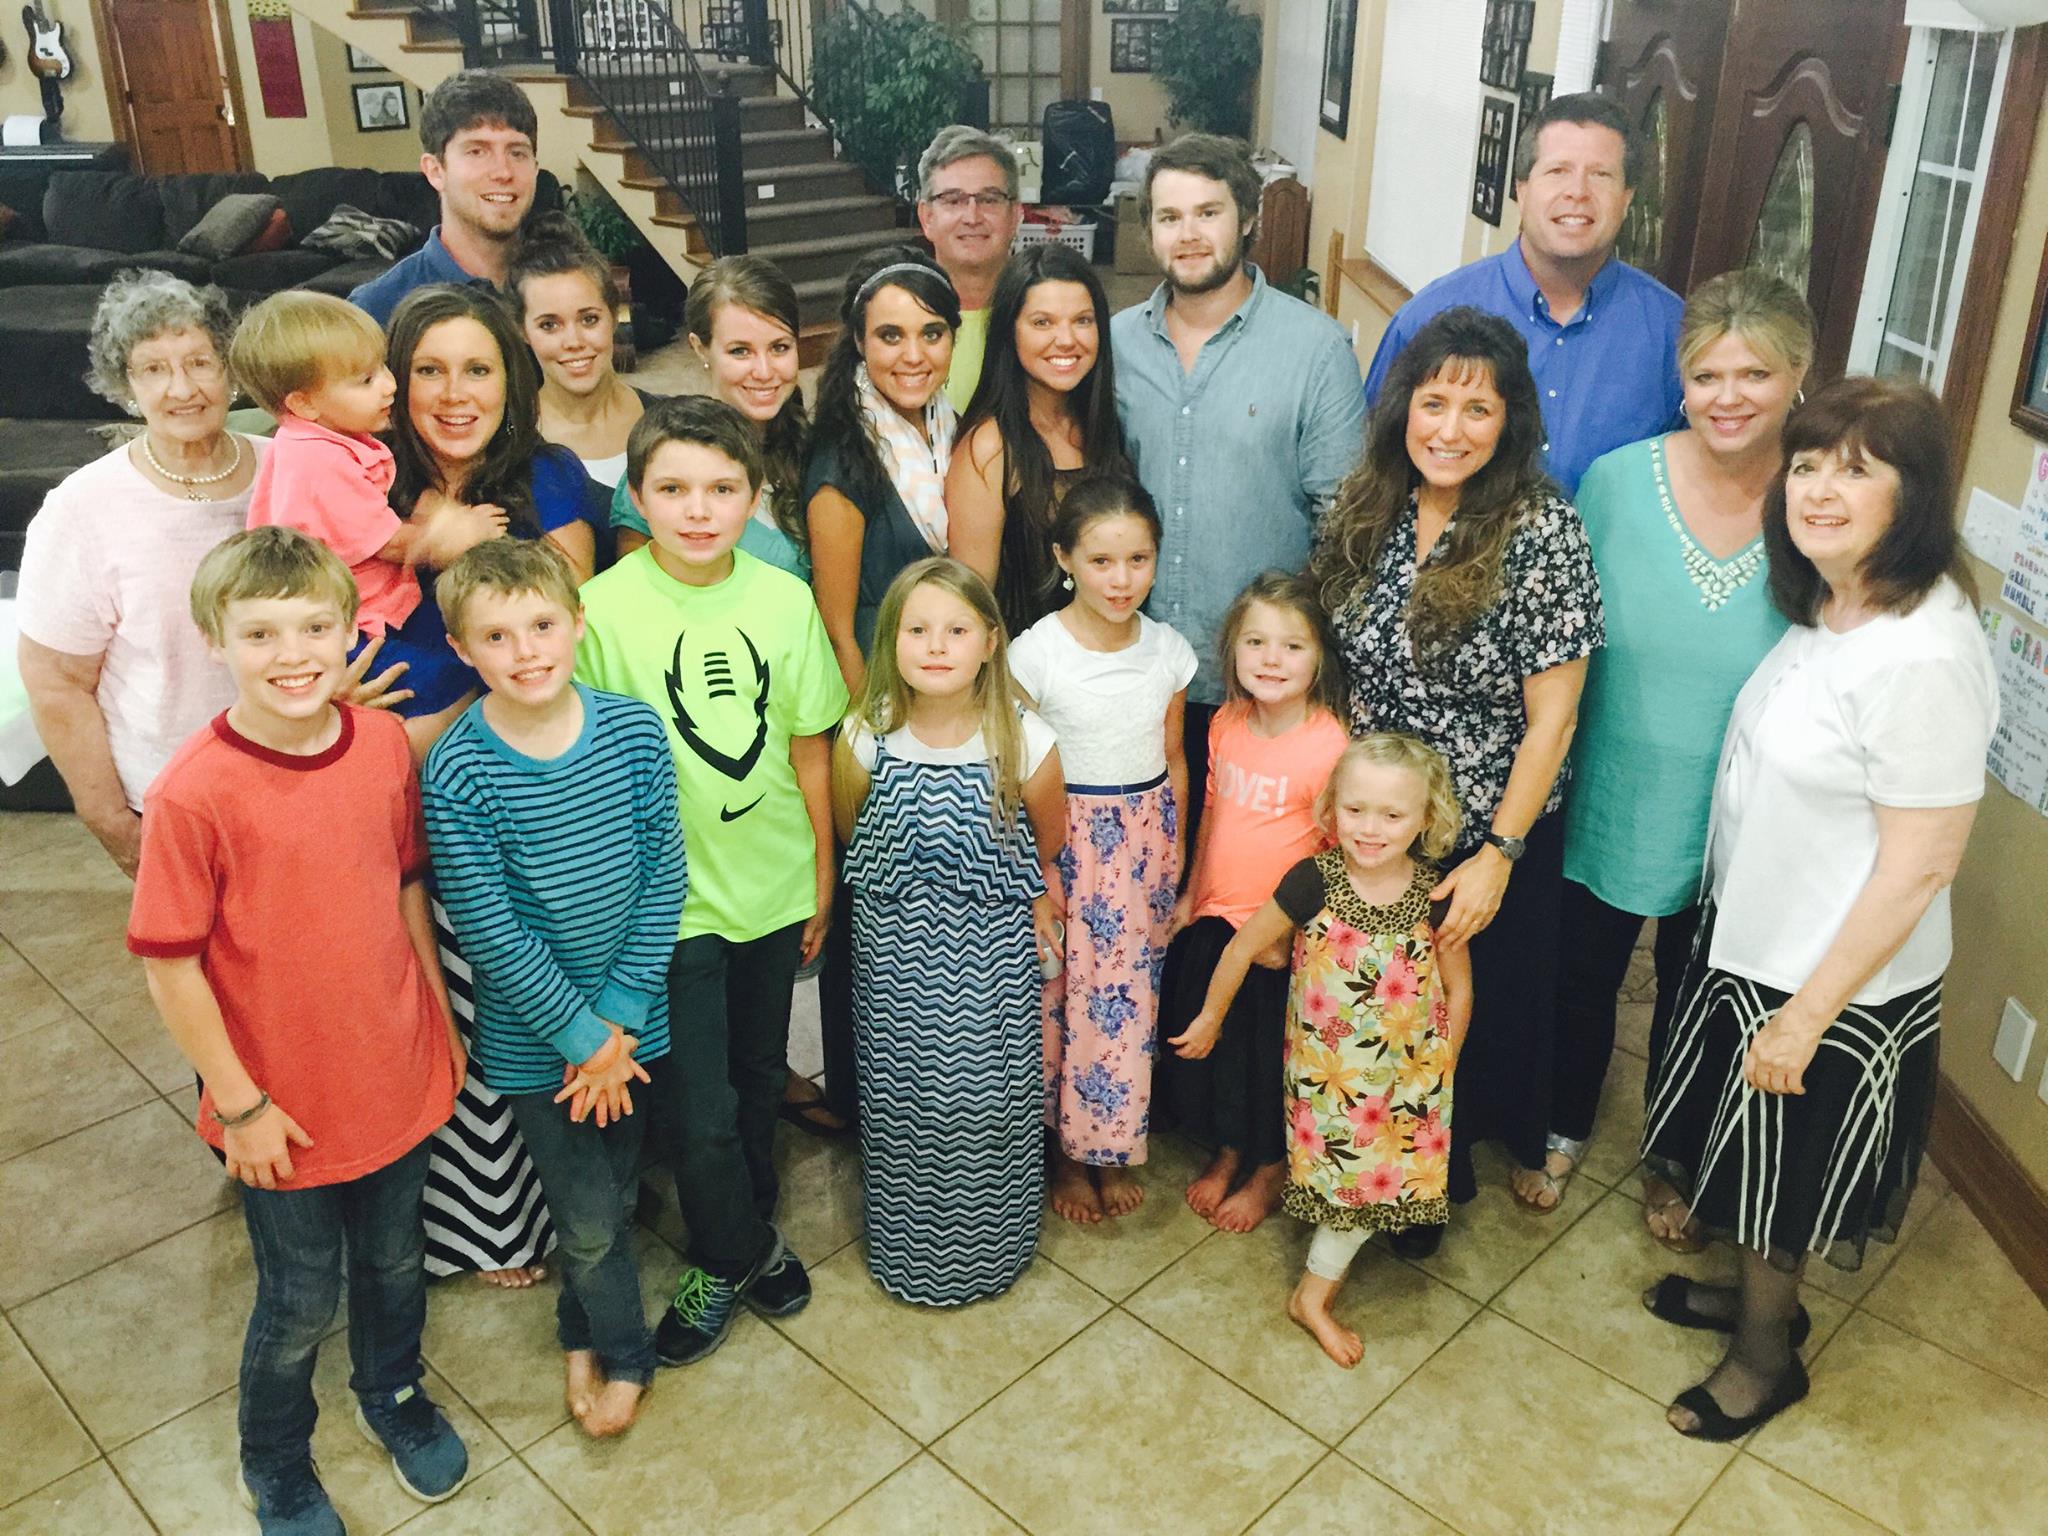 She isn't the first Duggar child to leave the fold, as Jill, Joy-Anna Duggar and others have moved on as well